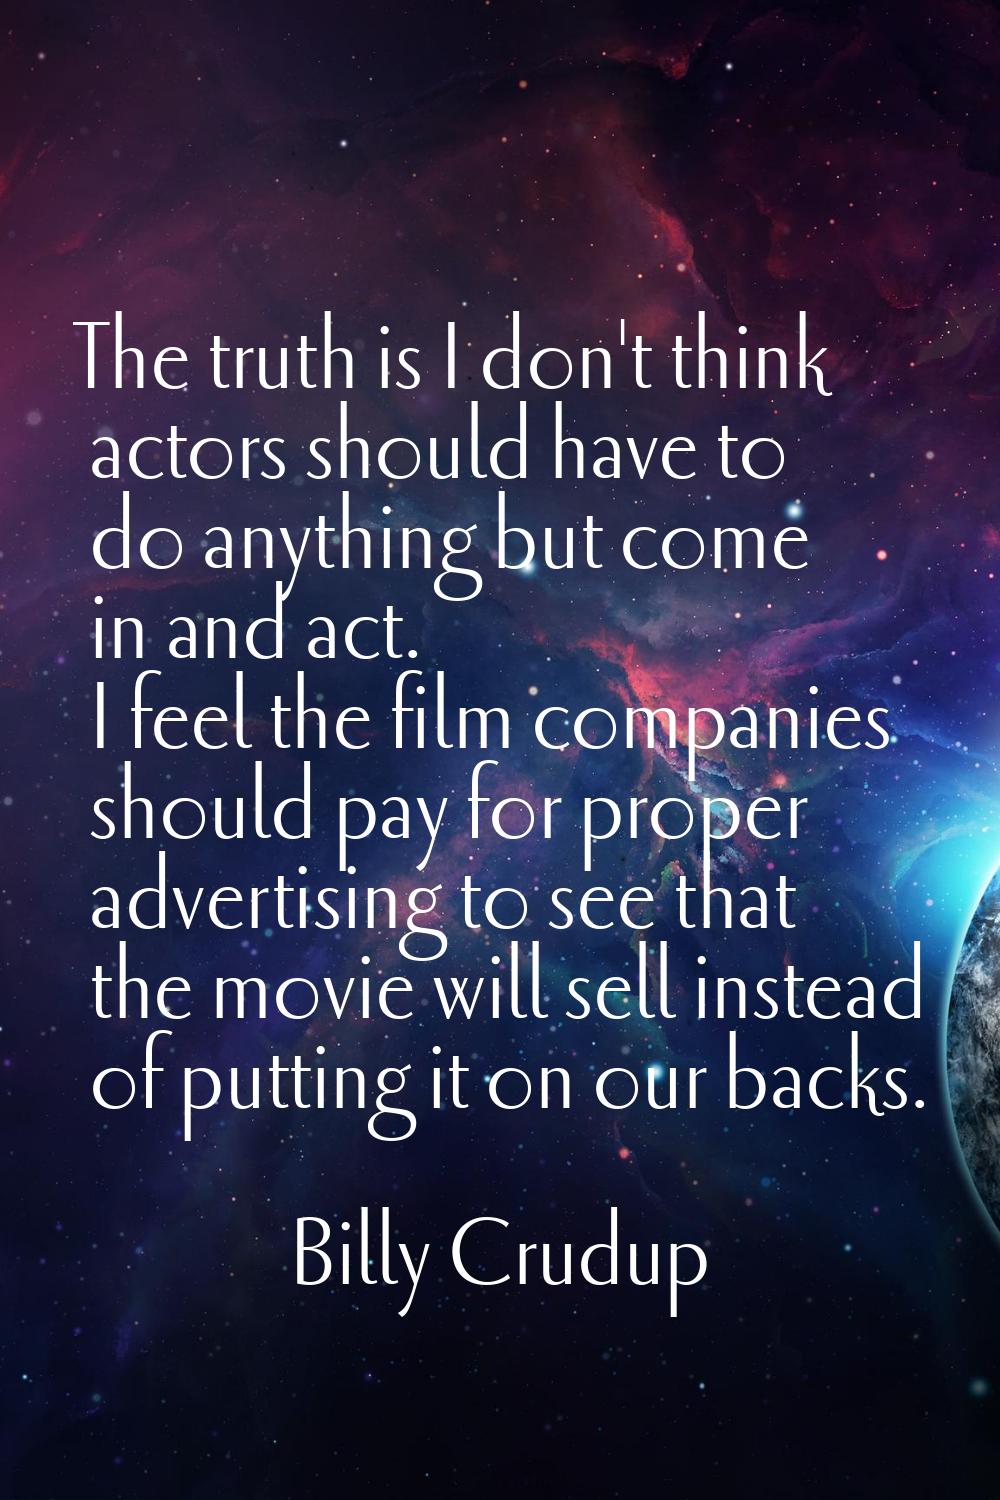 The truth is I don't think actors should have to do anything but come in and act. I feel the film c